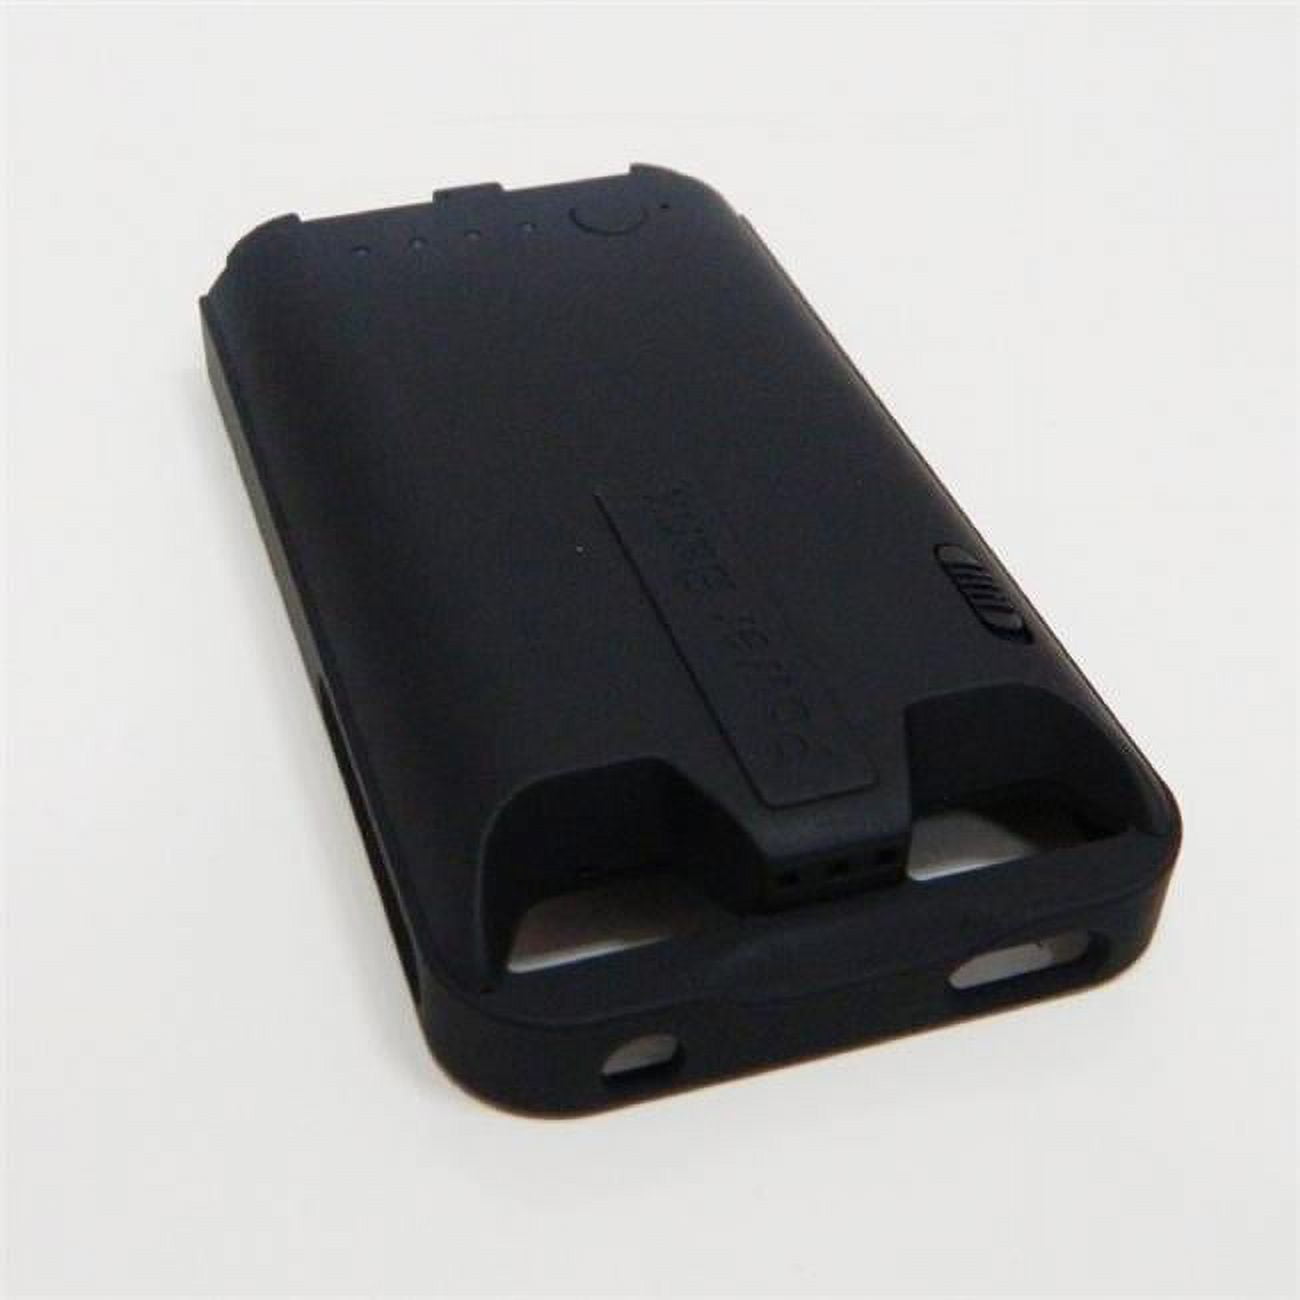 Picture of Lawmate PV-IP45 iPhone Extended Battery Case DVR